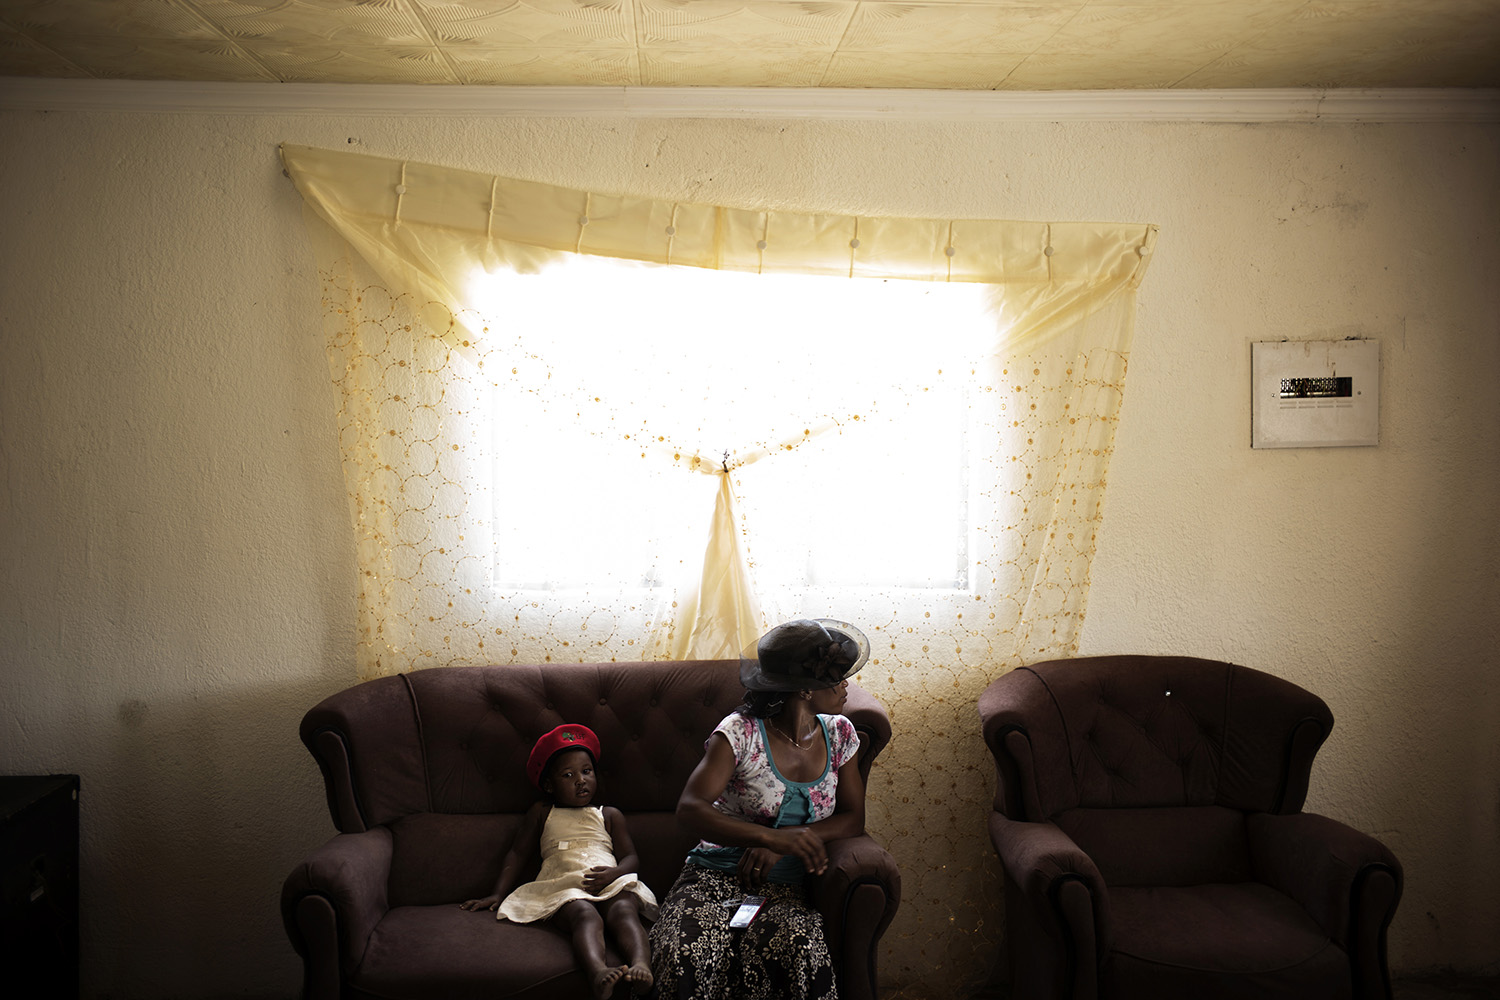 Jan. 22, 2014. Sthandiwe Hlongwane, 31, sits with her daughter inside a newly built house she received from the Economic Freedom Fighters leader and former ANC youth leader Julius Malema in Nkandla, South African .